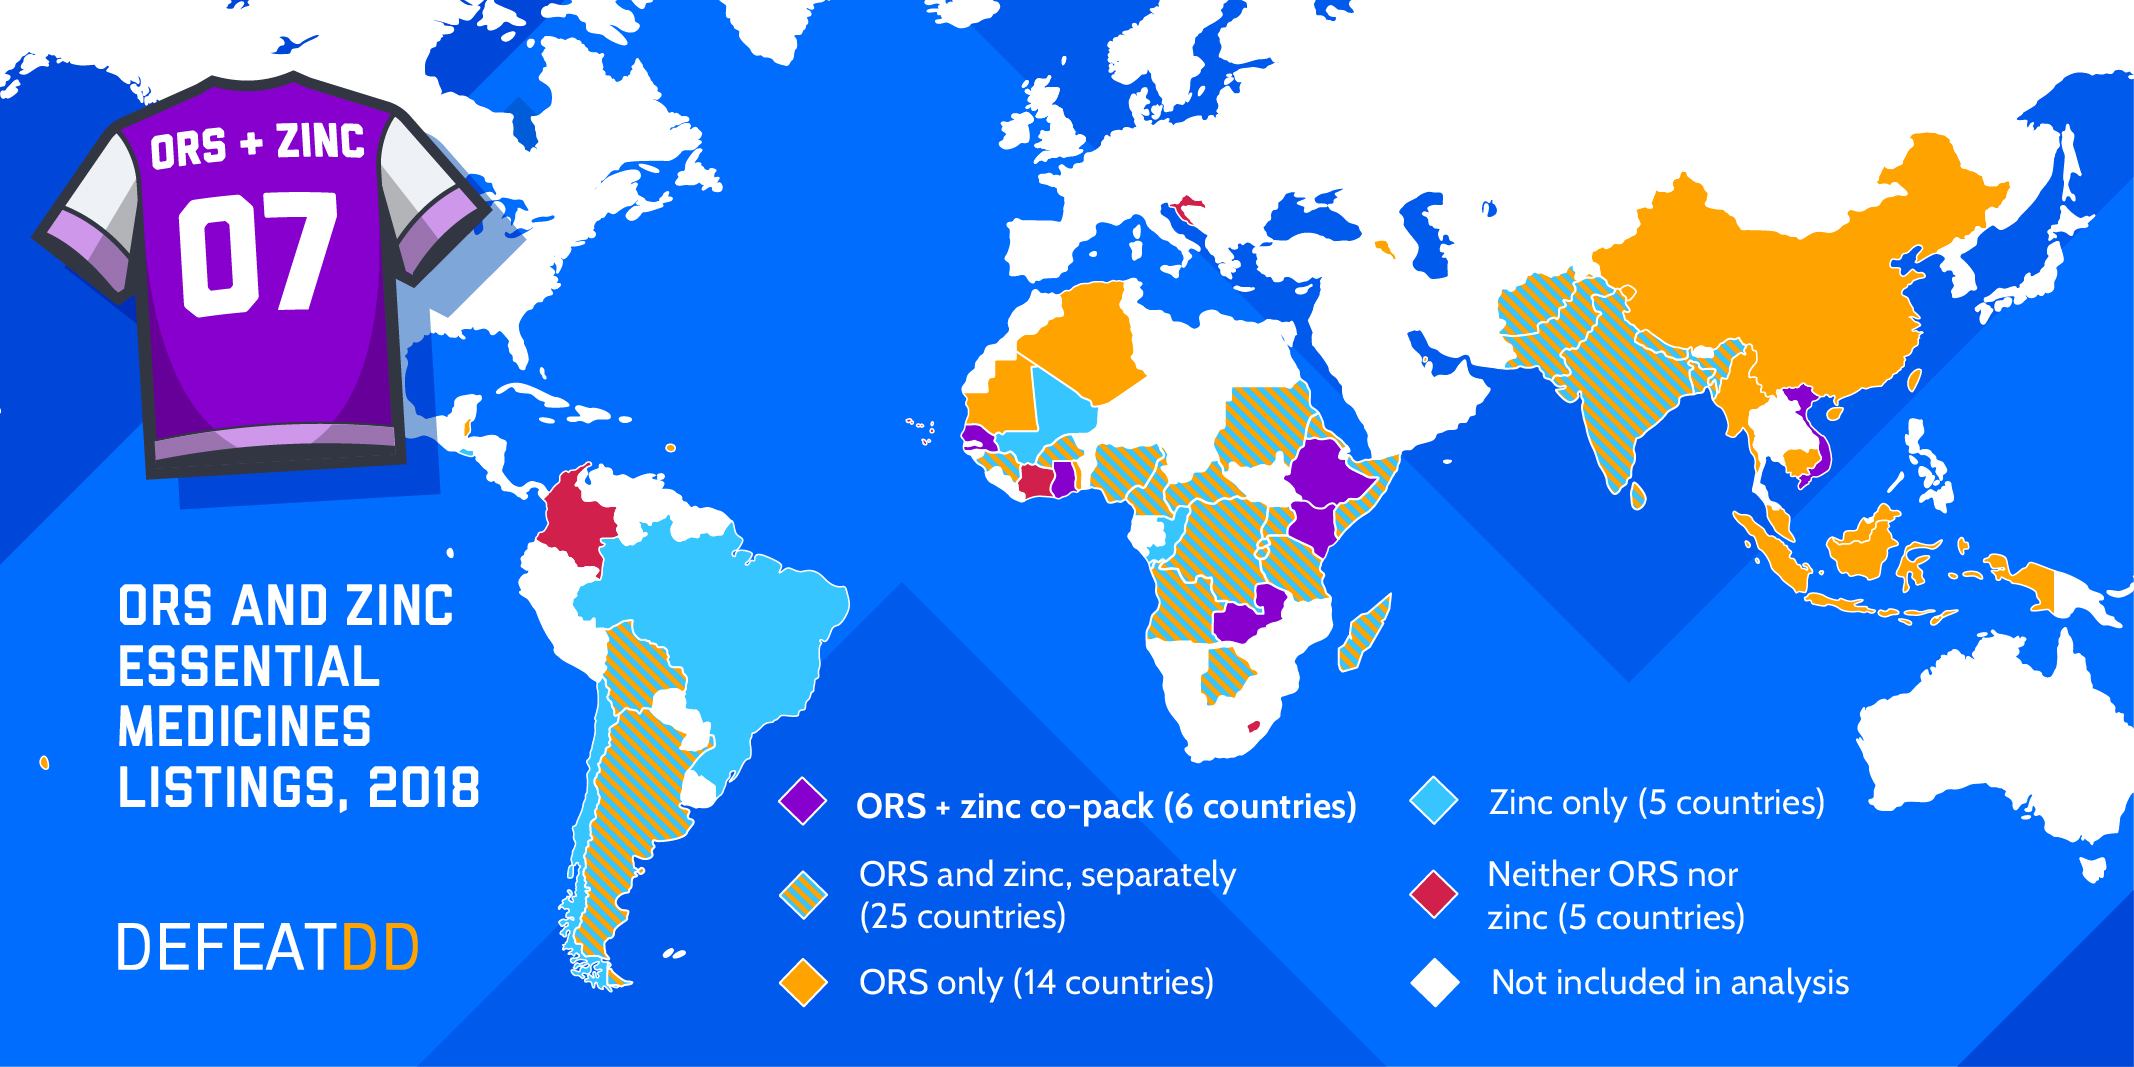 Color coded map of countries that have introduced co-packaged ORS and zinc